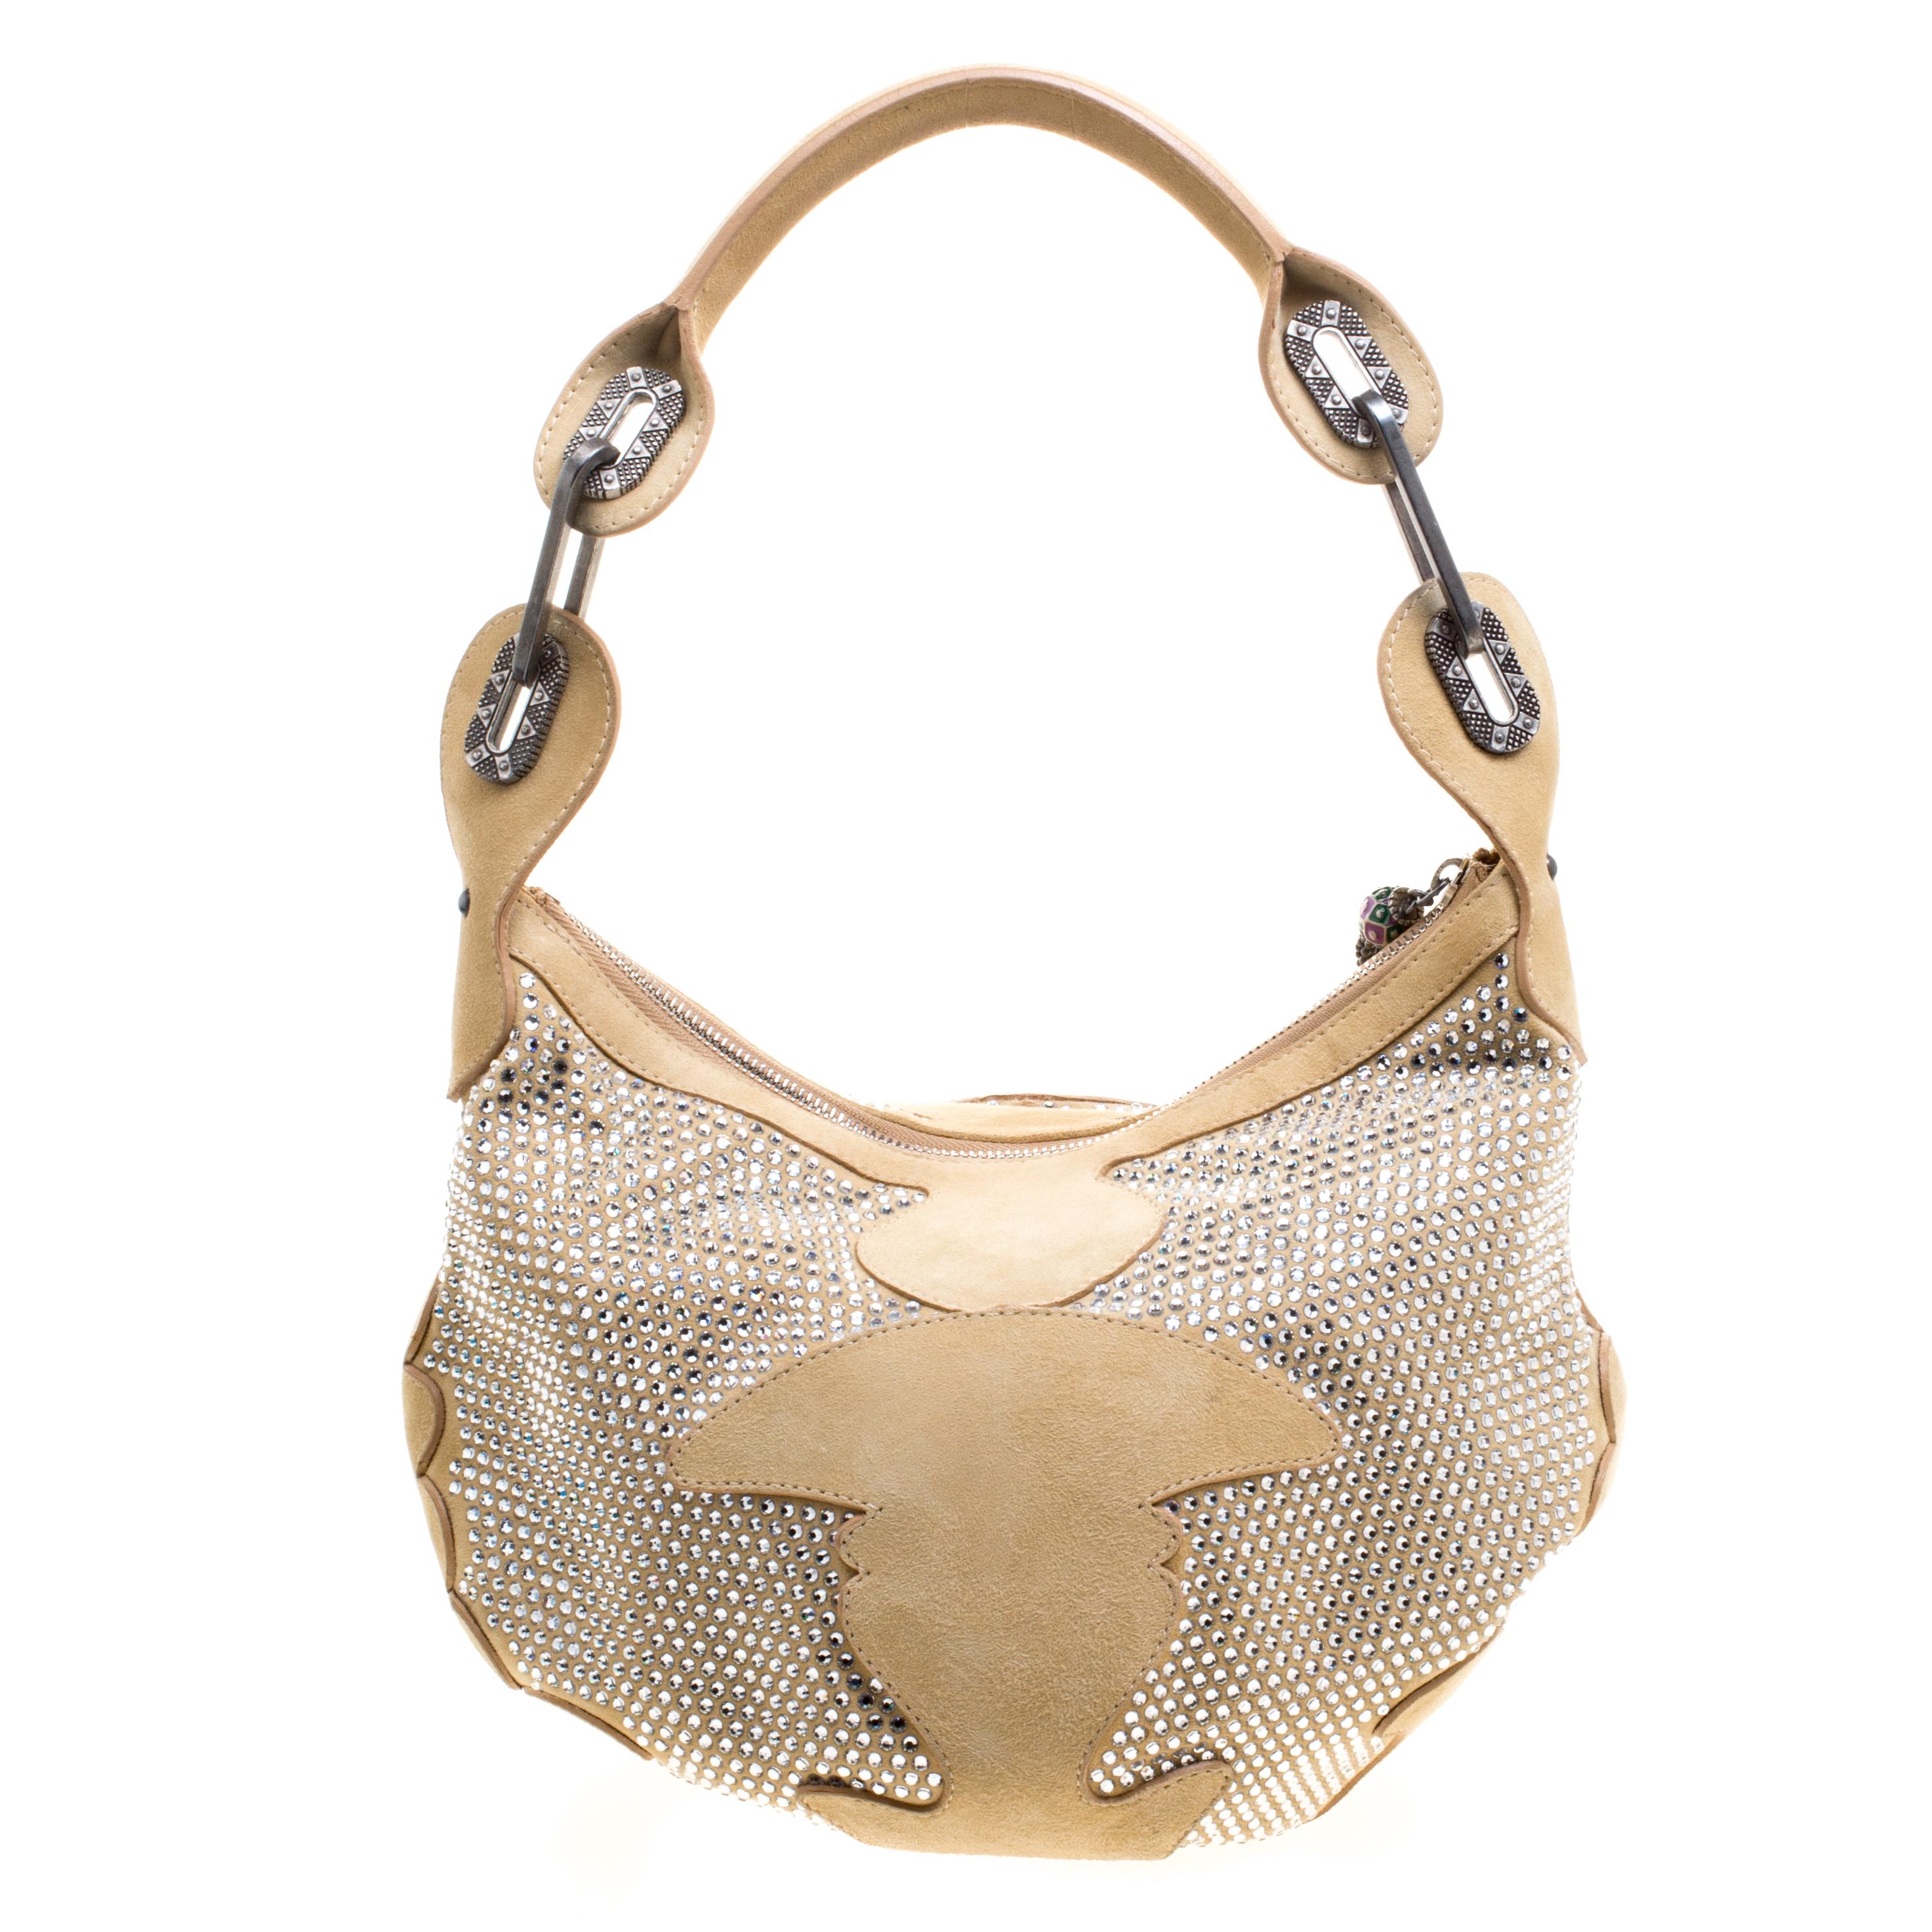 This Grant Hobo from the house of Jimmy Choo is designed in a light brown suede body with Swarovski embellishment all over. It comes with a top zipper closure and fitted with a uniquely designed shoulder strap. This chic bag can easily hold all your